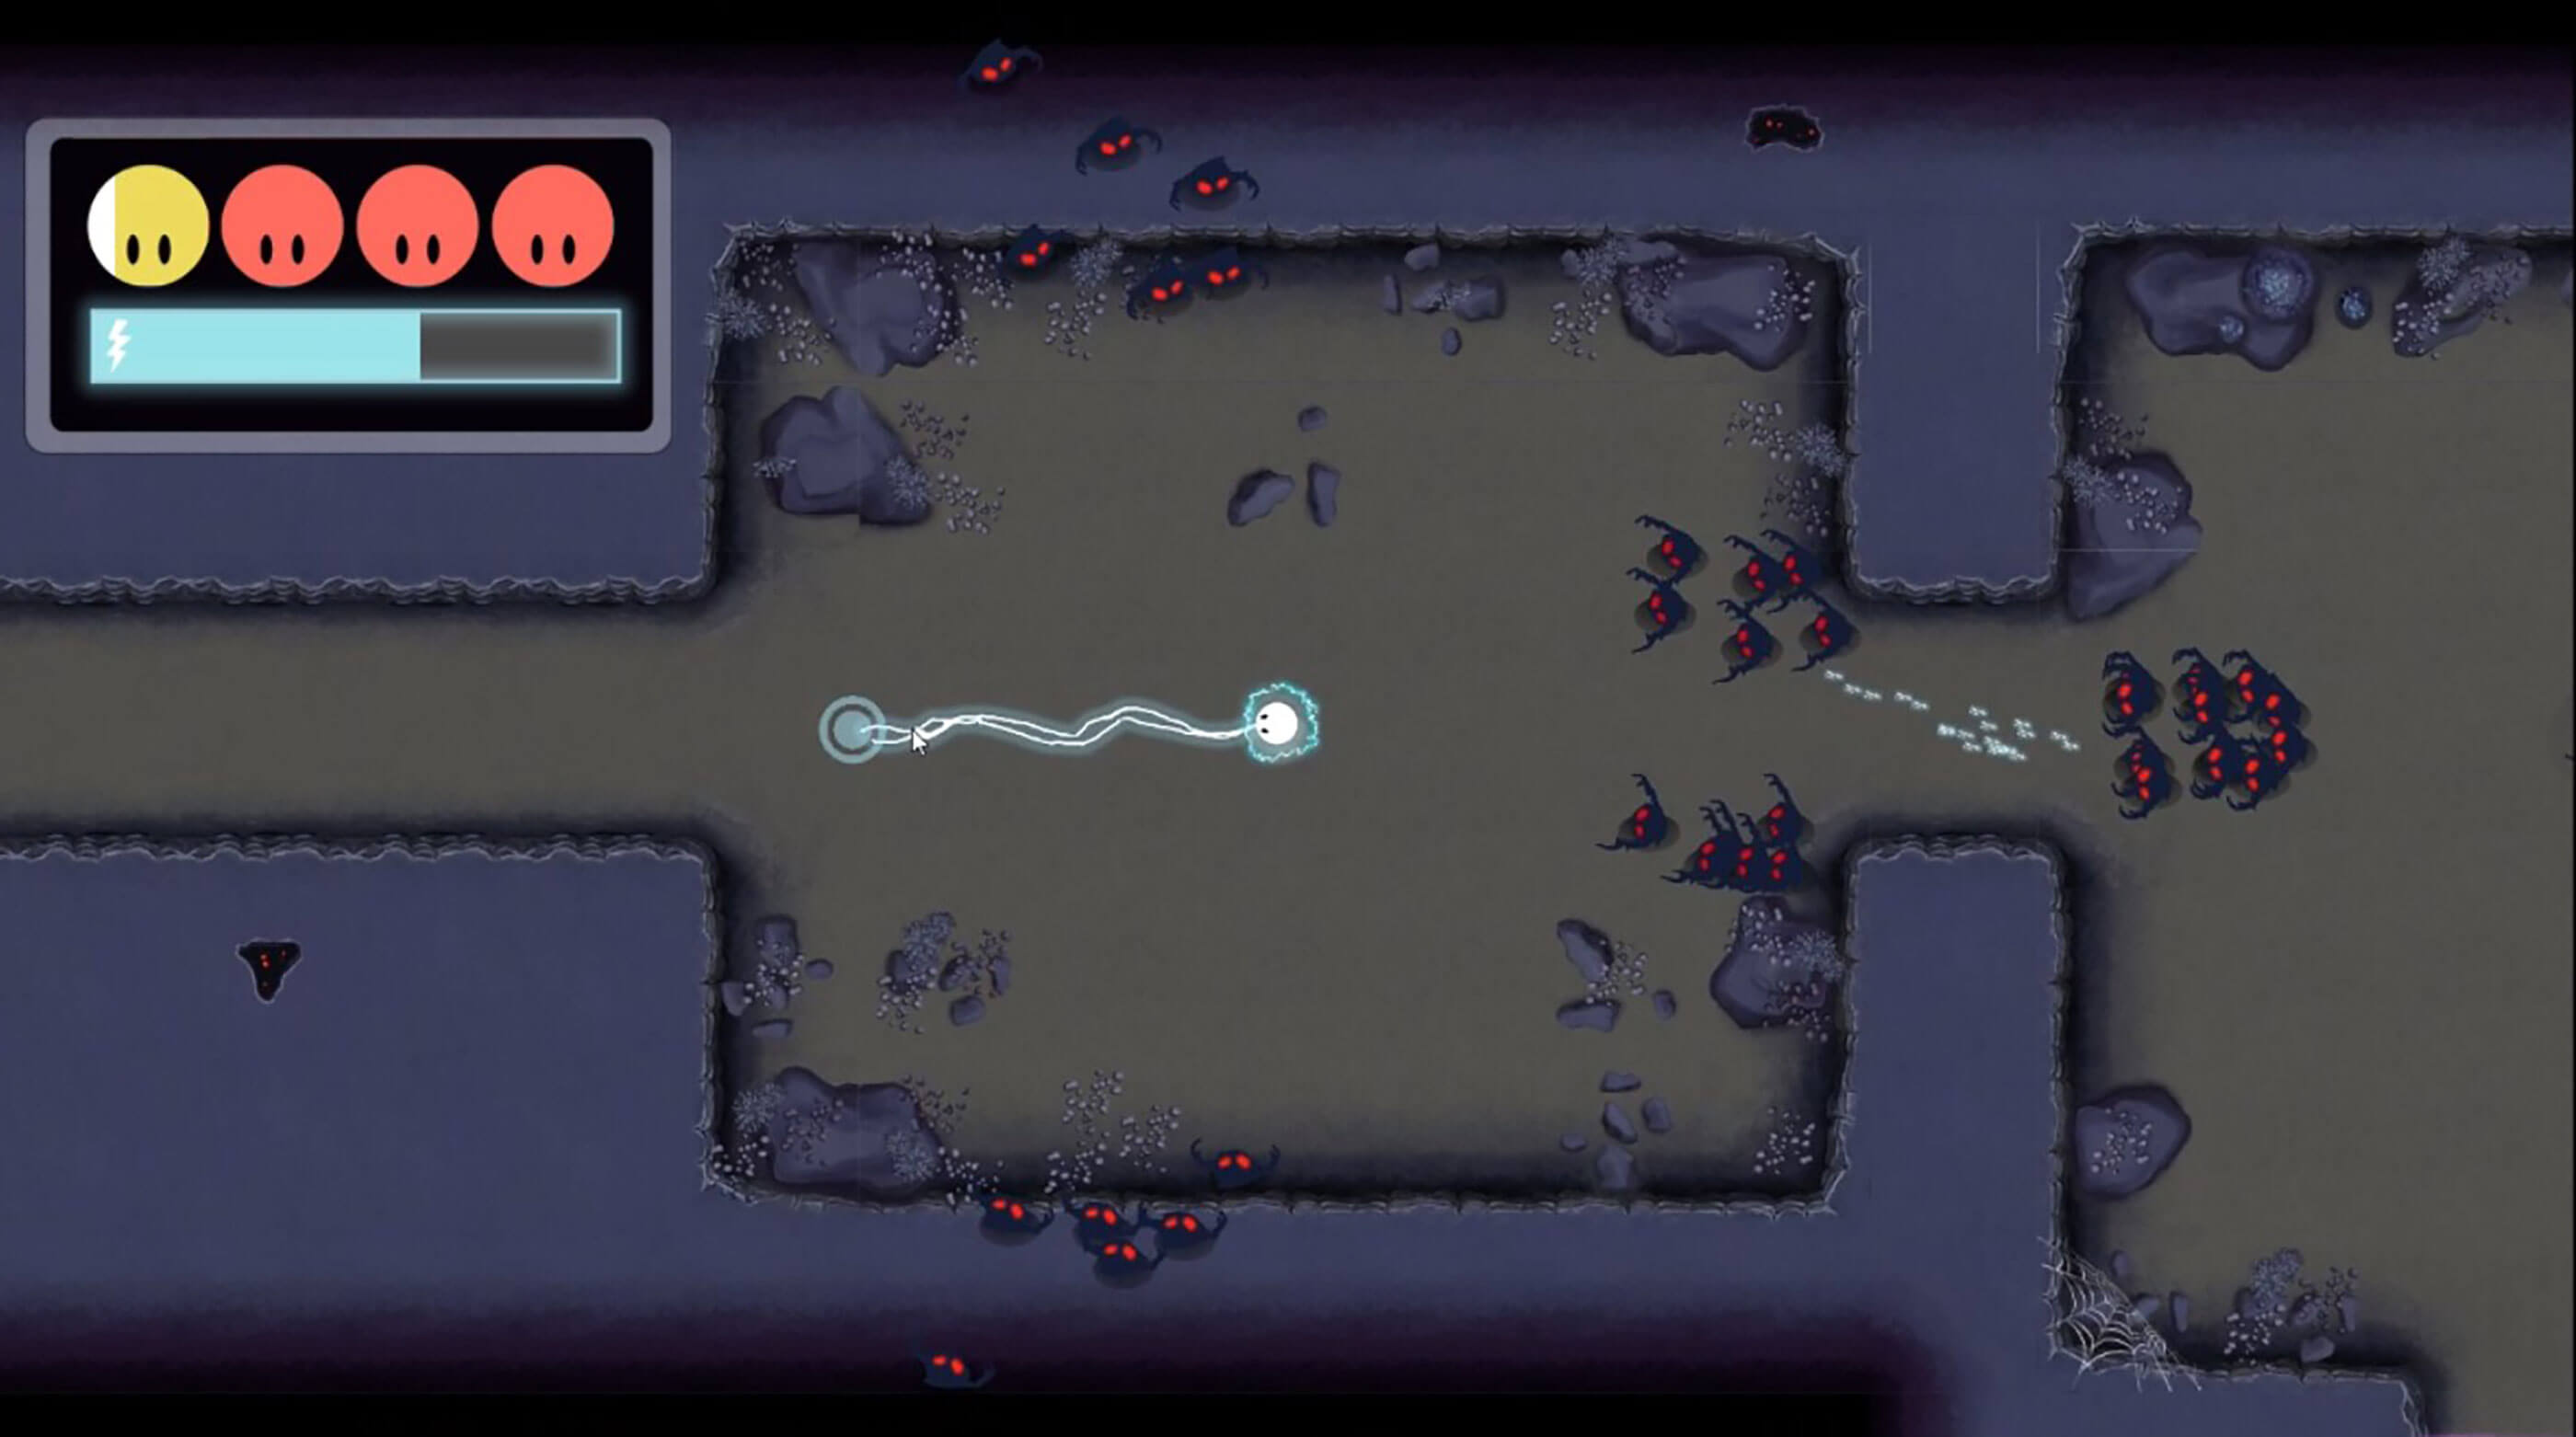 A white orb character surrounded by approaching enemies